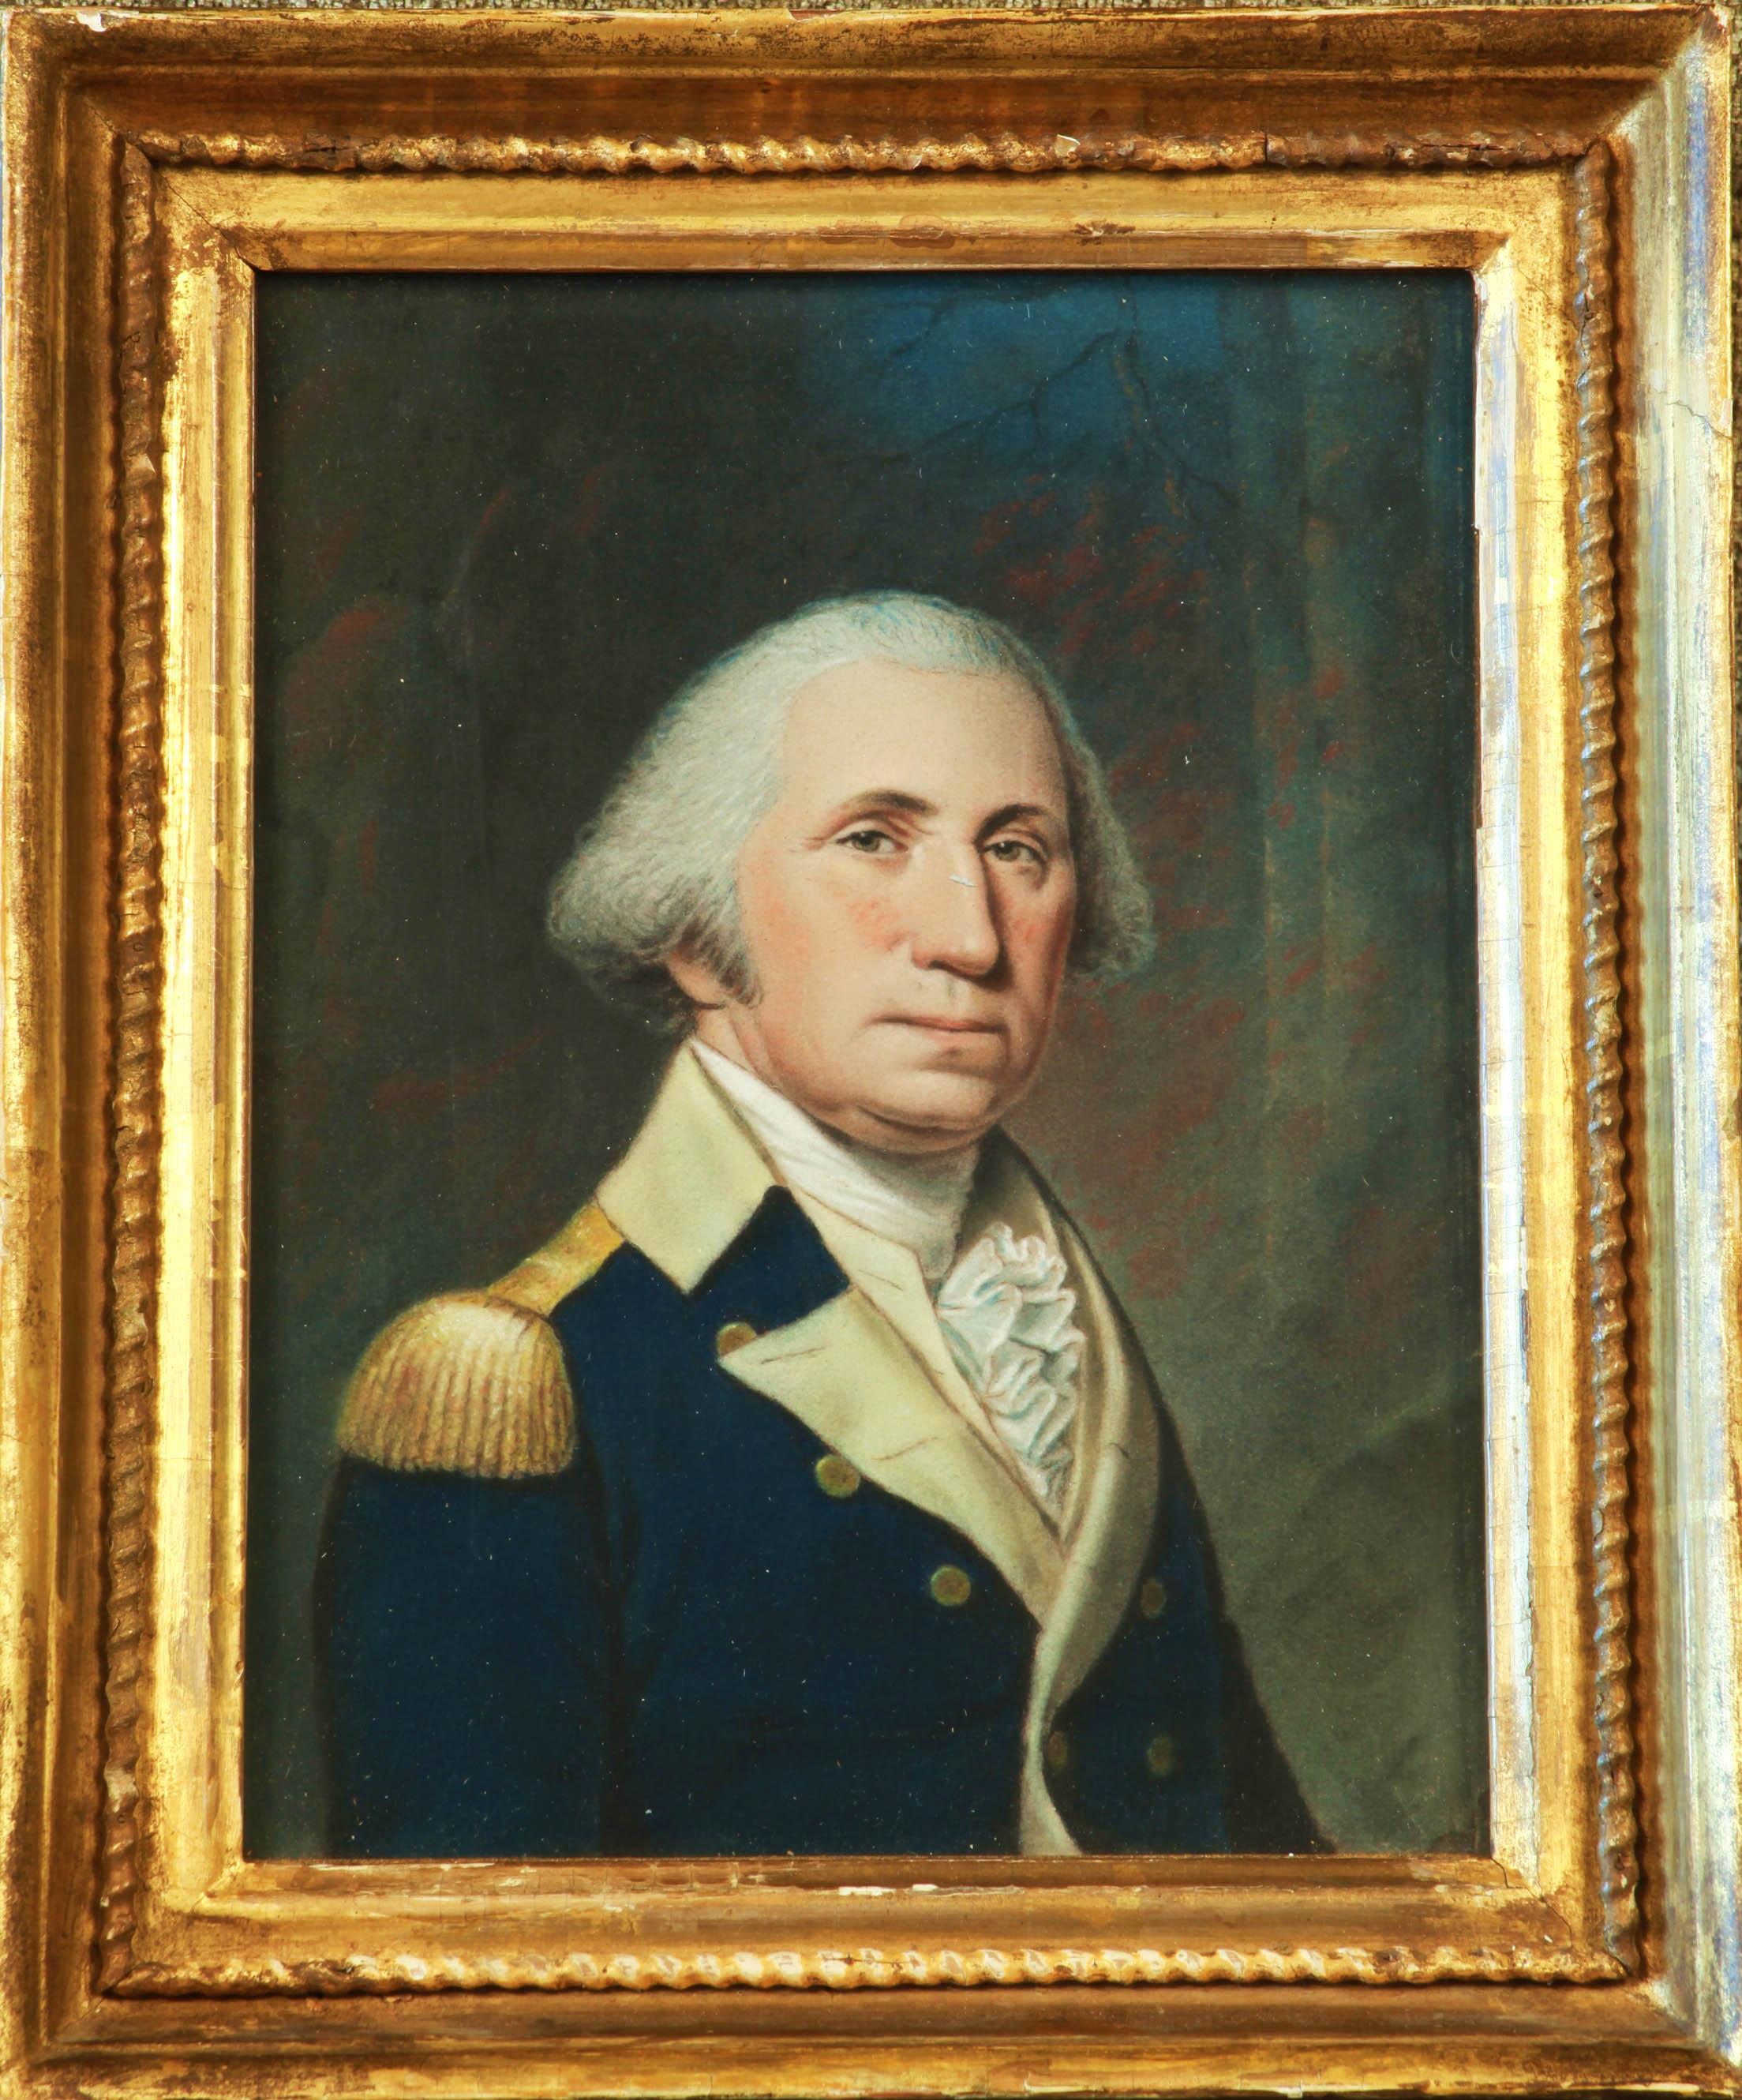 Ellen Wallace Sharples (1769-1849)
Portrait of George Washington, c. 1800
Pastel on paper
9 ¼x 7 ¼inches

Ellen Sharples was one of the country’s first professional women artists. She was born in England to a Quaker family. Ellen Wallace was a